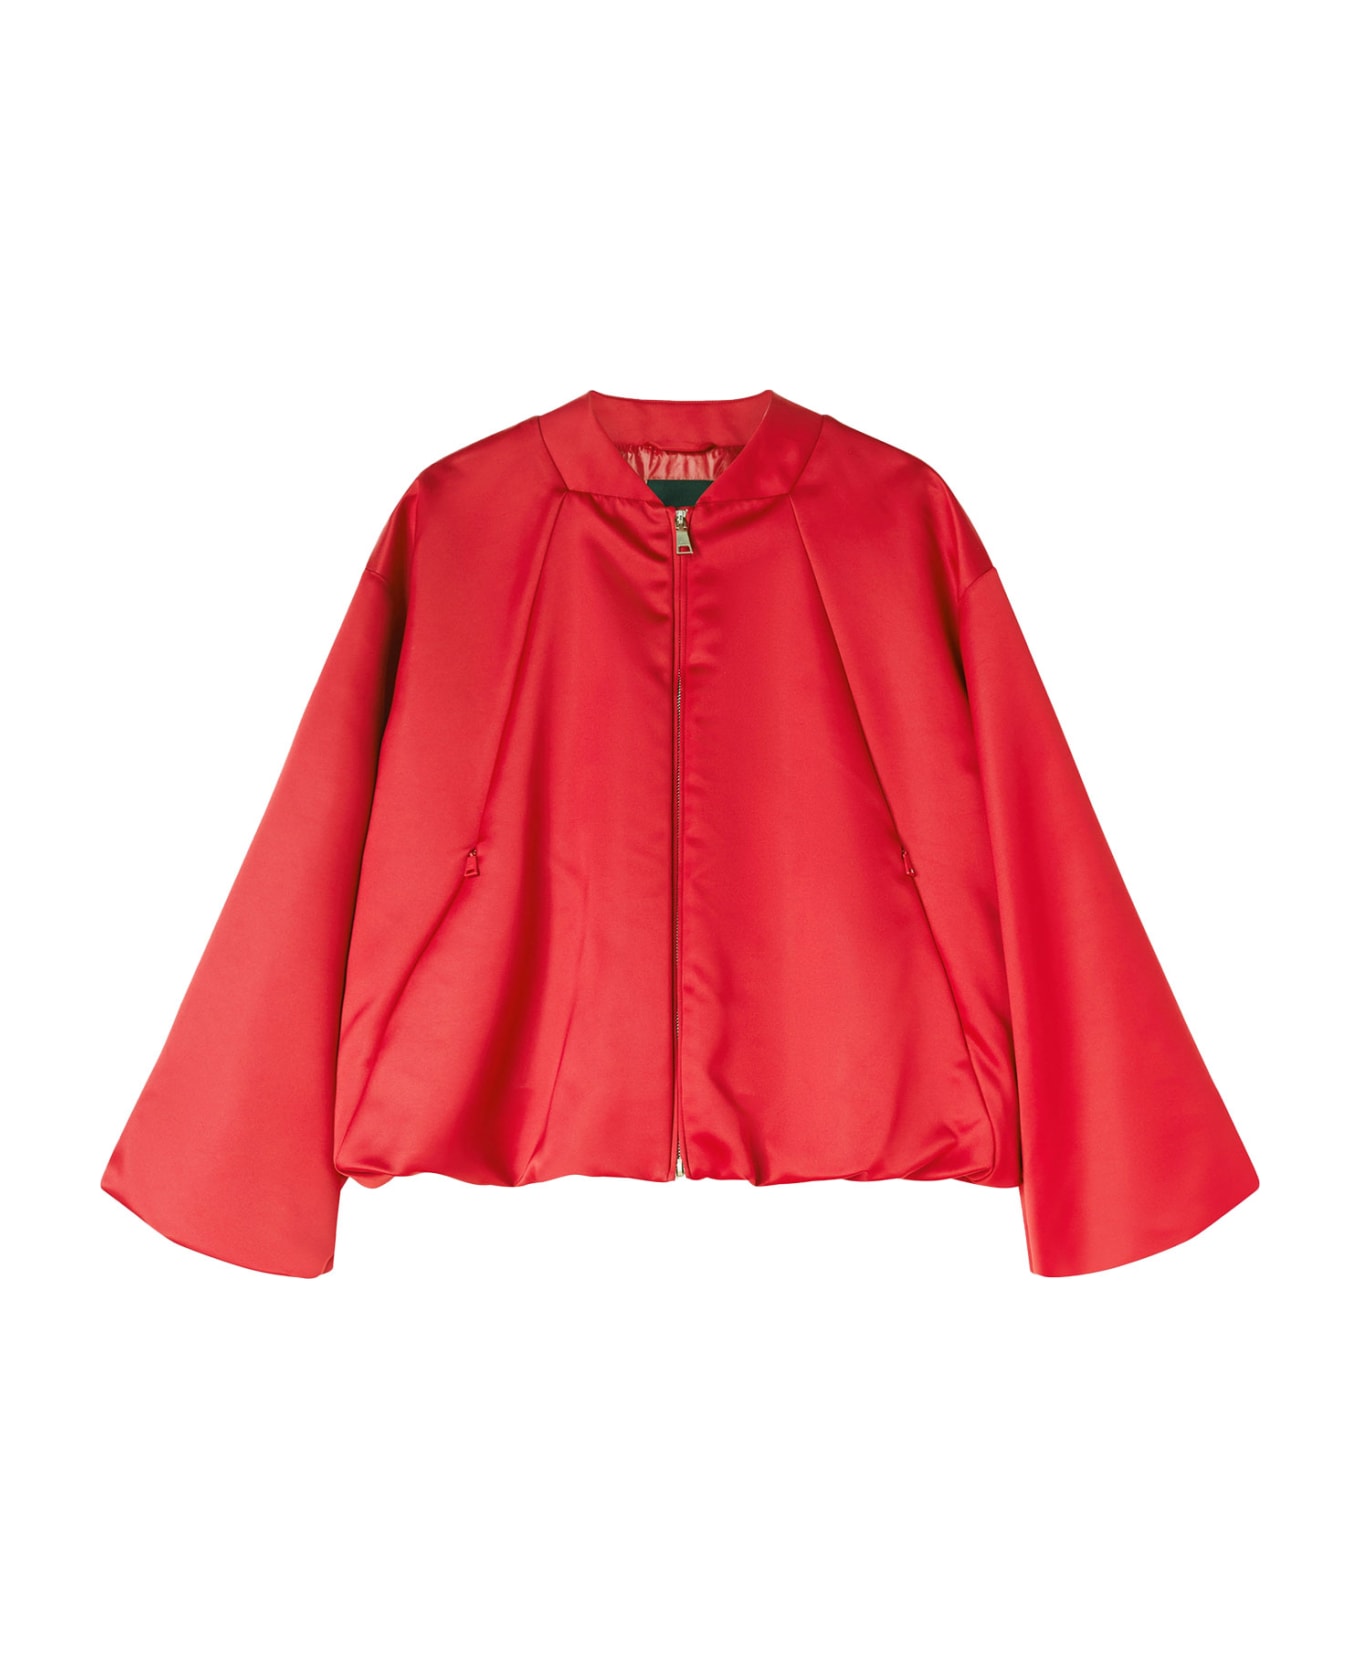 Add Red Satin Jacket With Zip - RED SALSA